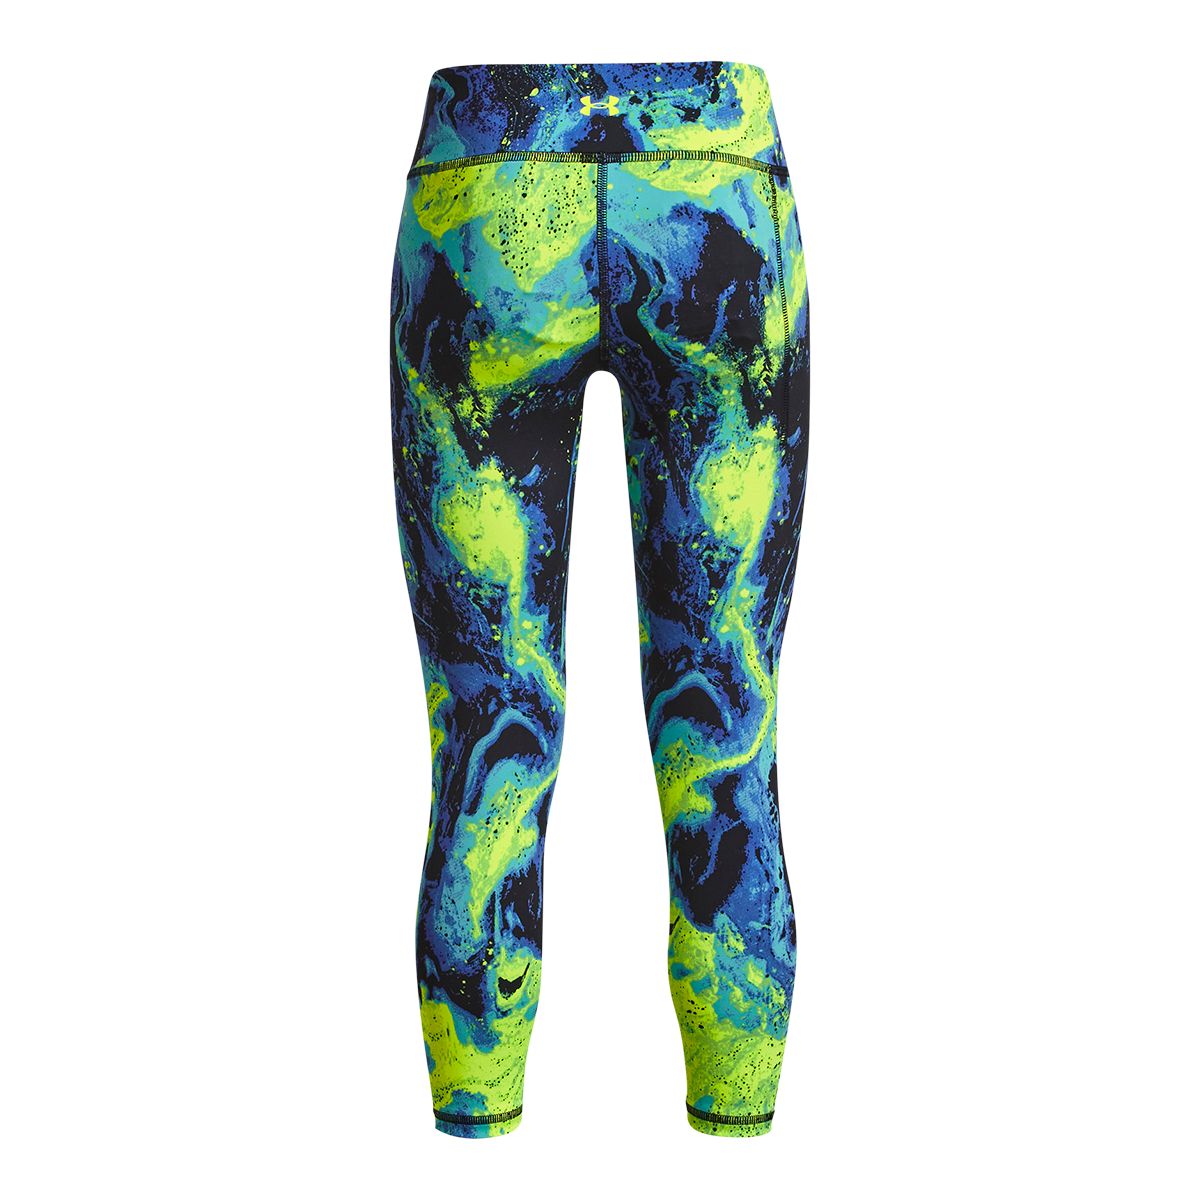 Under Armour Girls' Project Rock Girls Lets go Leggings